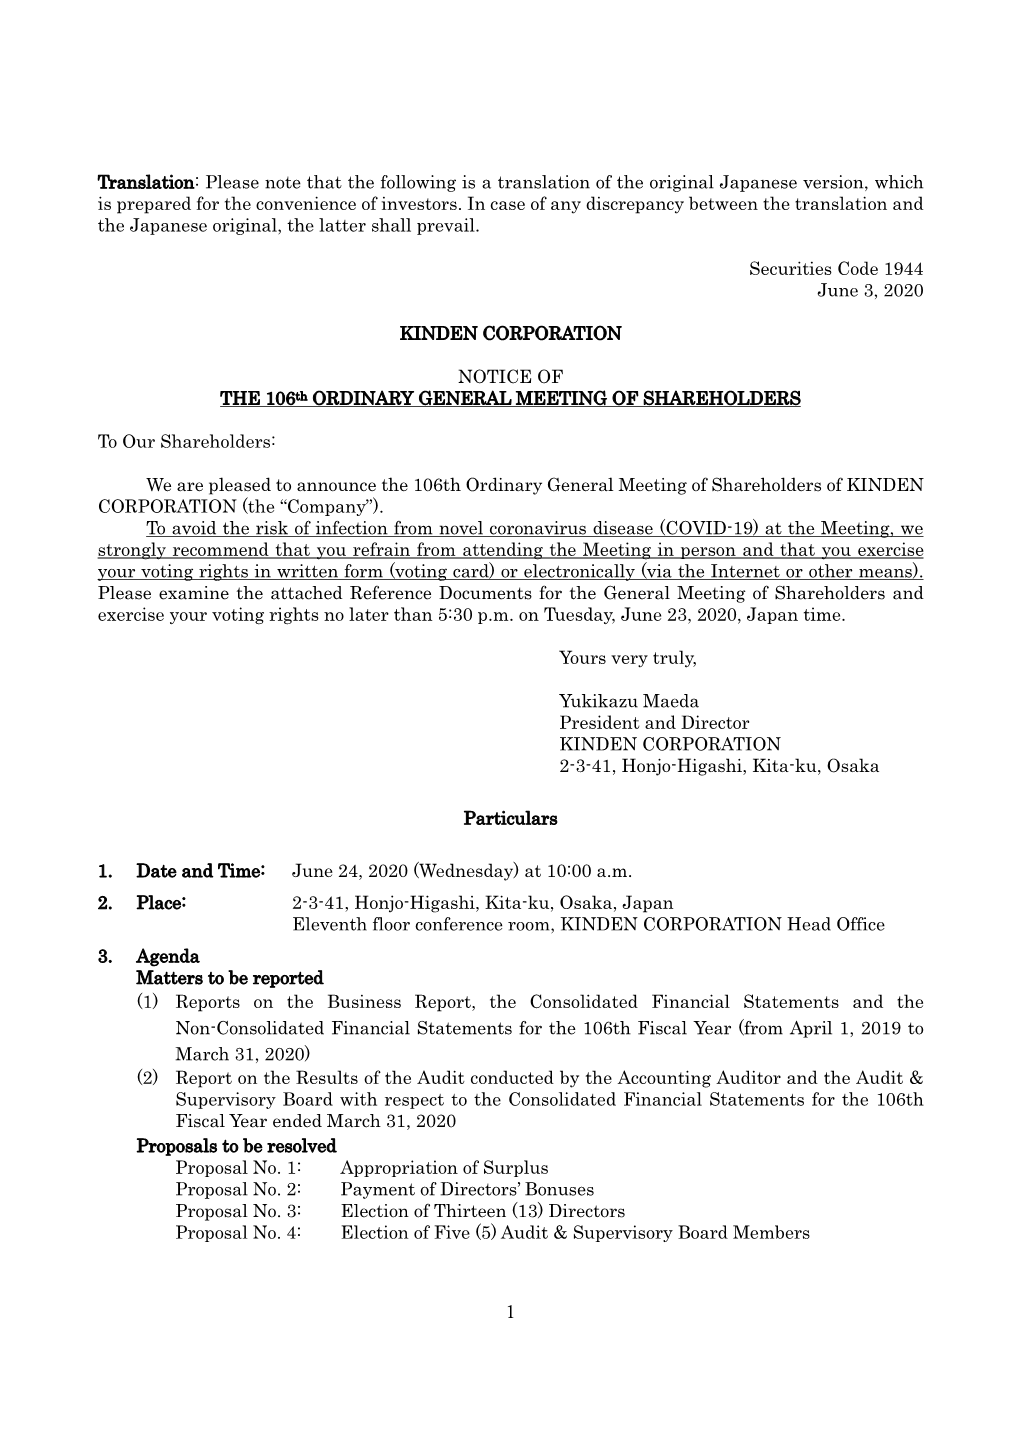 NOTICE of the 106Th ORDINARY GENERAL MEETING of SHAREHOLDERS